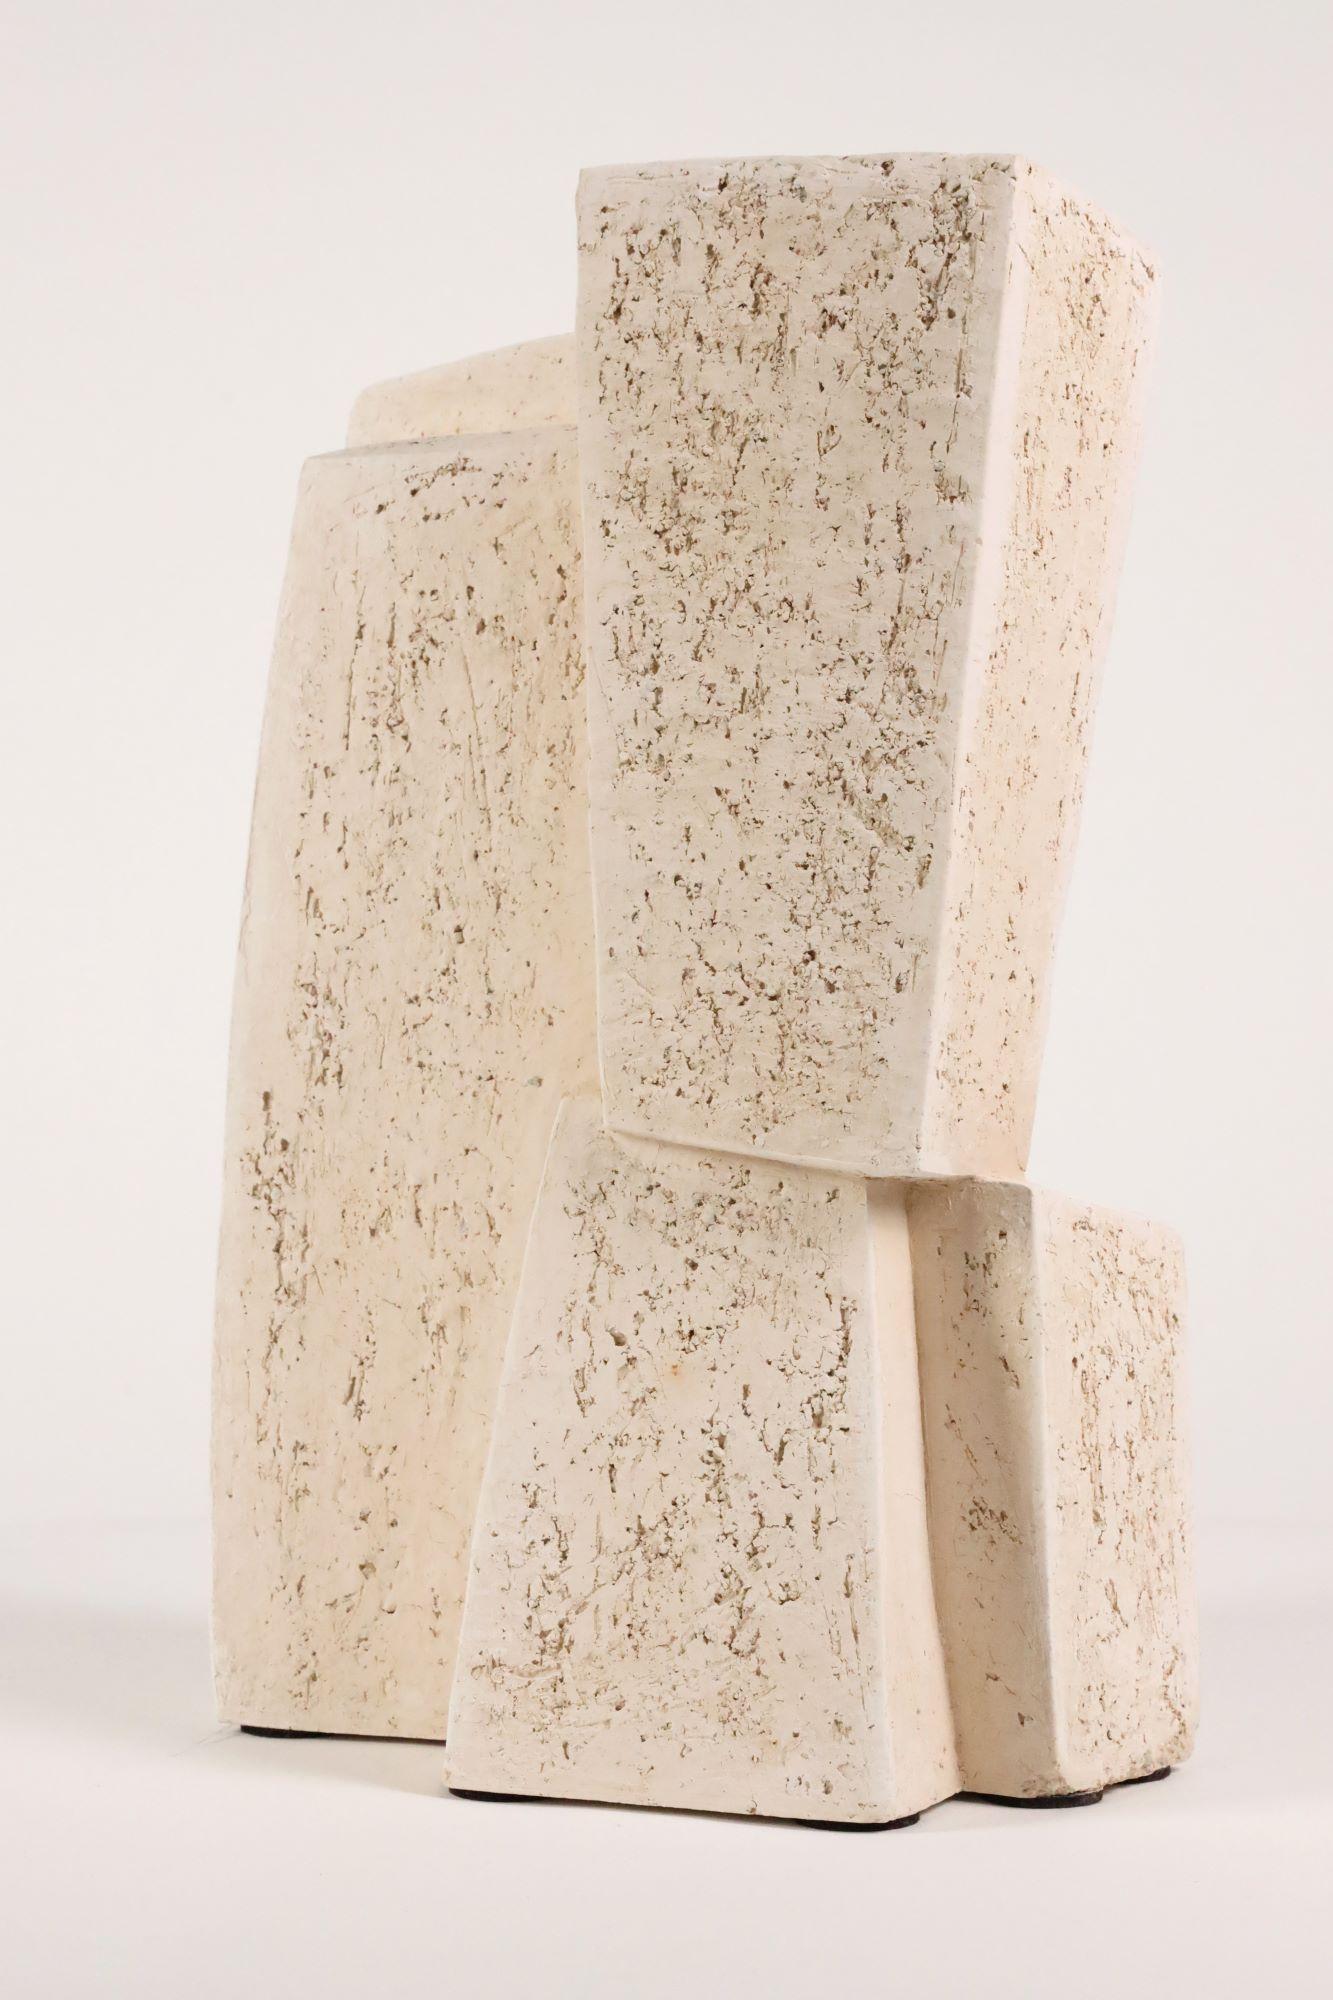 Union V by Delphine Brabant - Abstract geometric sculpture, terracotta, white